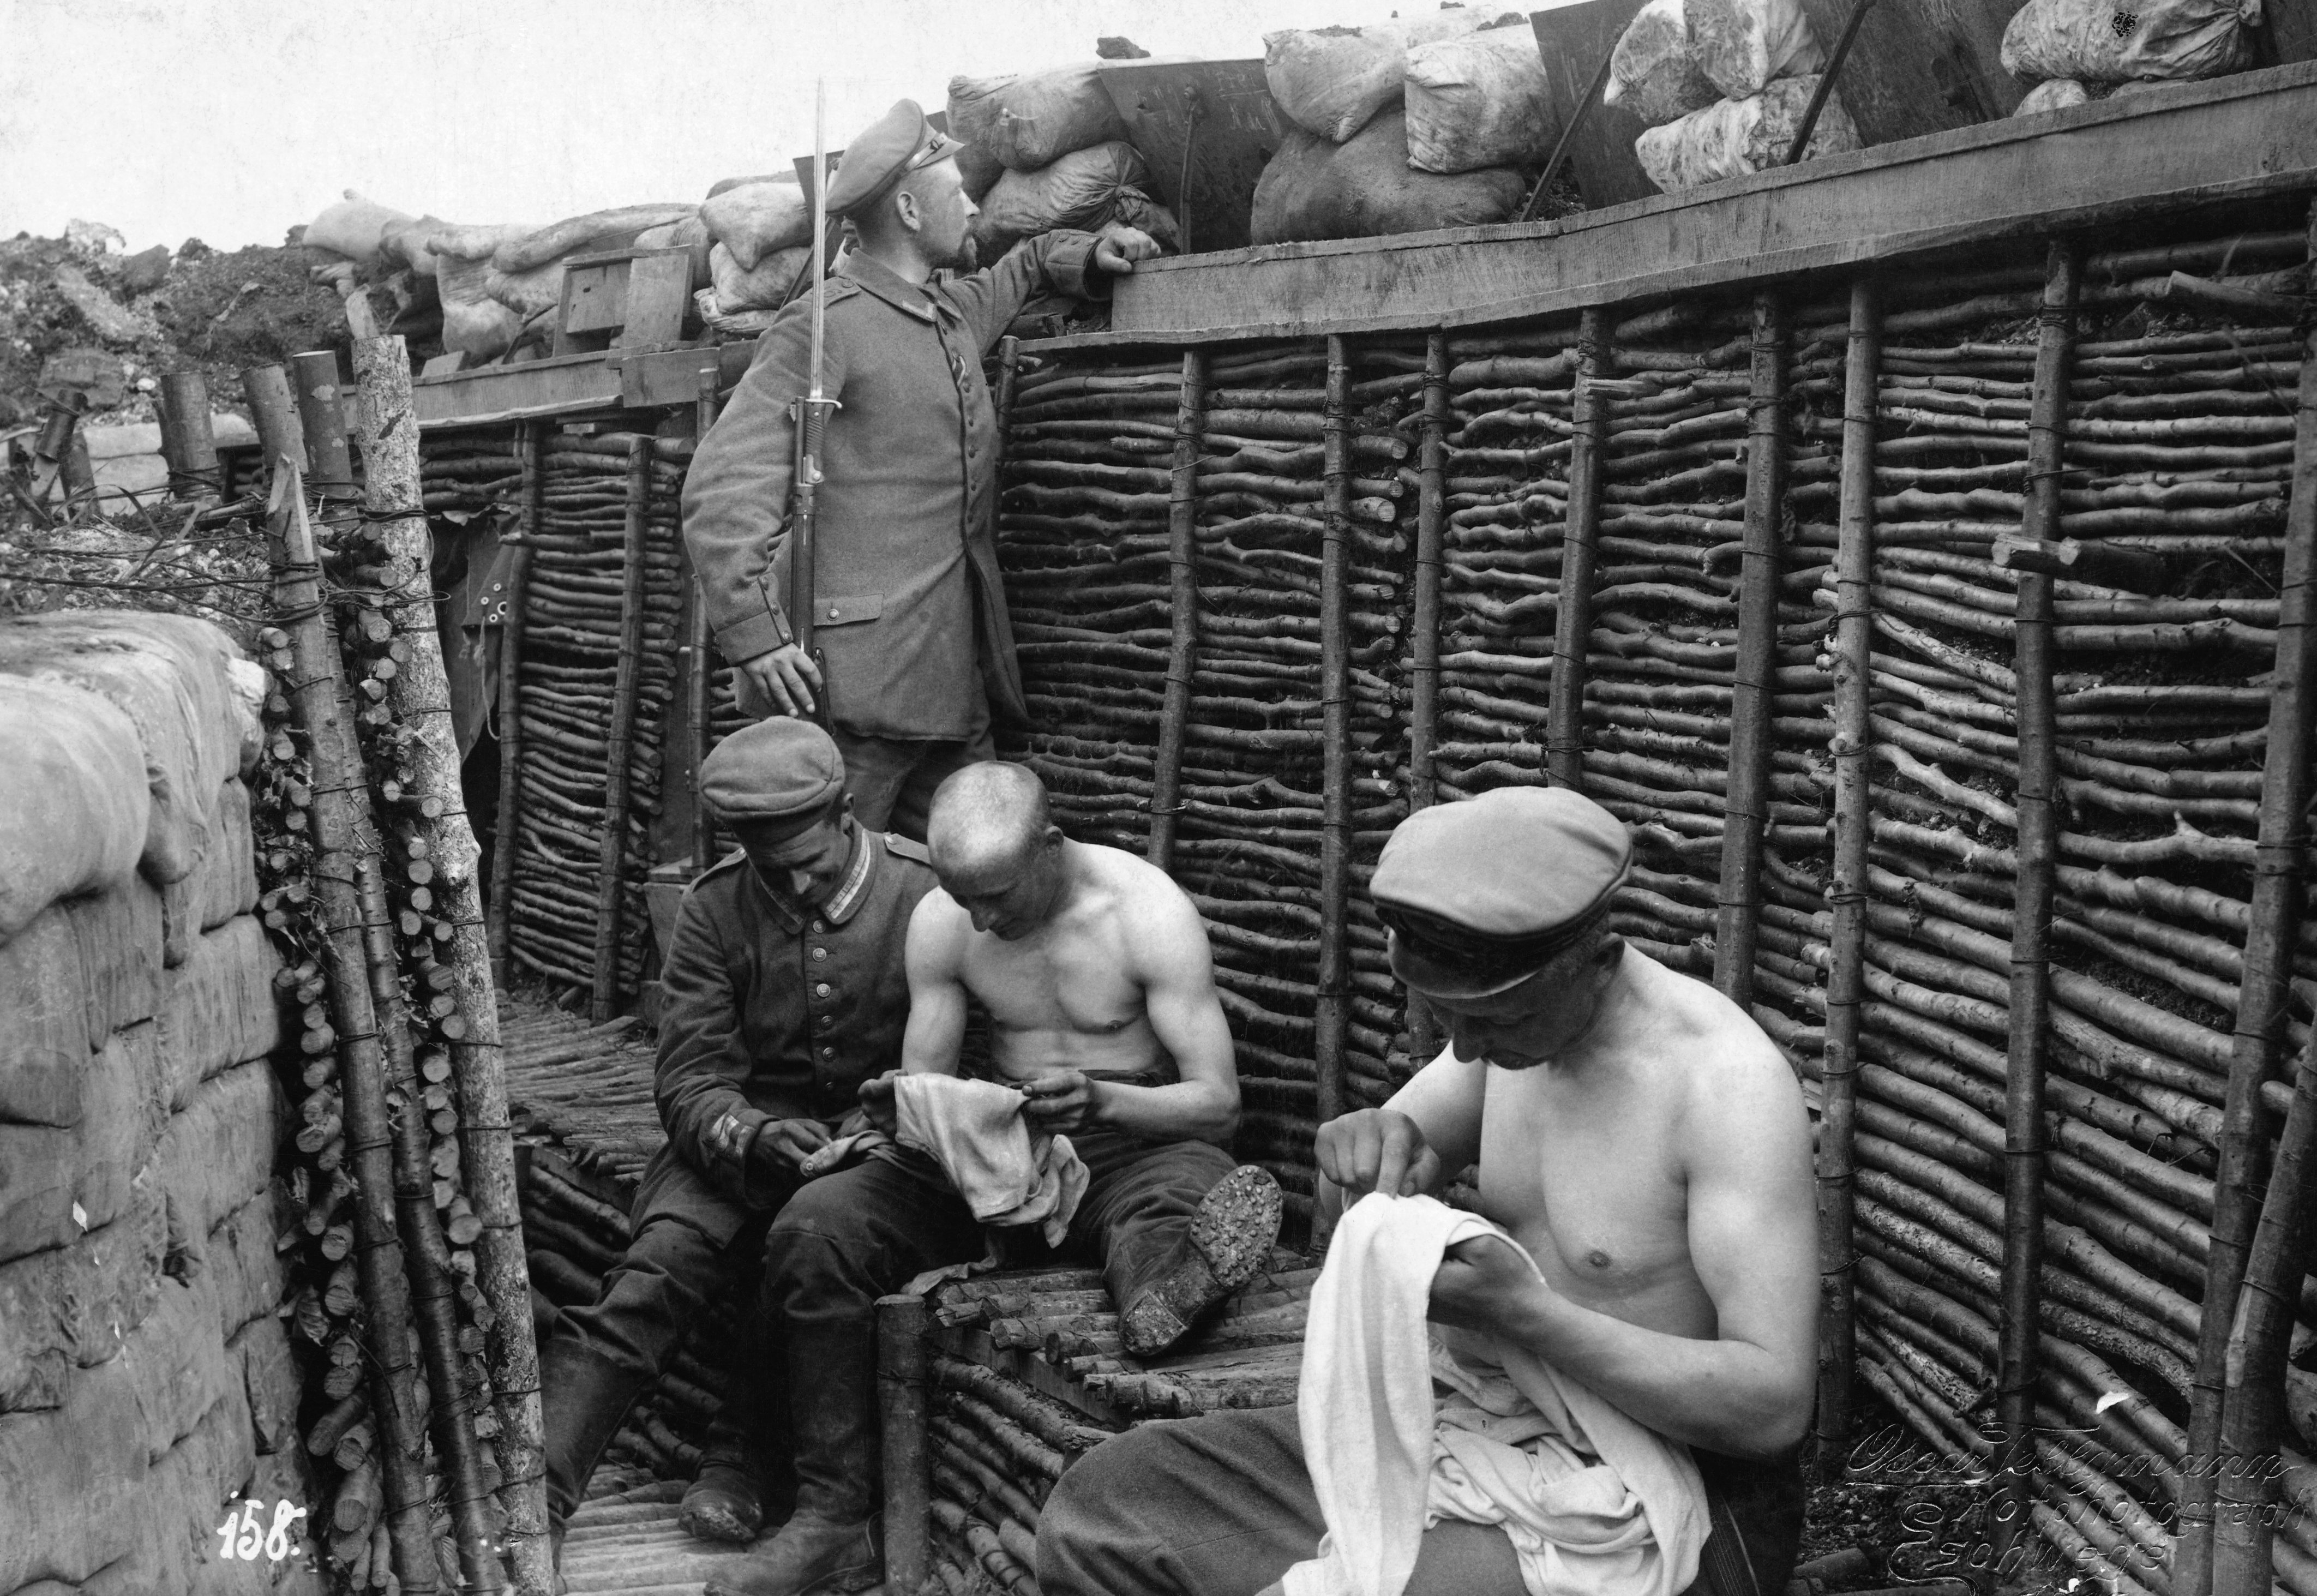 German soldiers in their trench picking lice out of their clothes during a quiet moment somewhere on the front in Northern France in 1916. On both sides soldiers had to endure unimaginable things just while in the trenches. Lice, rising water in the trenches causing trench foot, infections, colds, and numerous other ailments were brutal to soldiers at times.